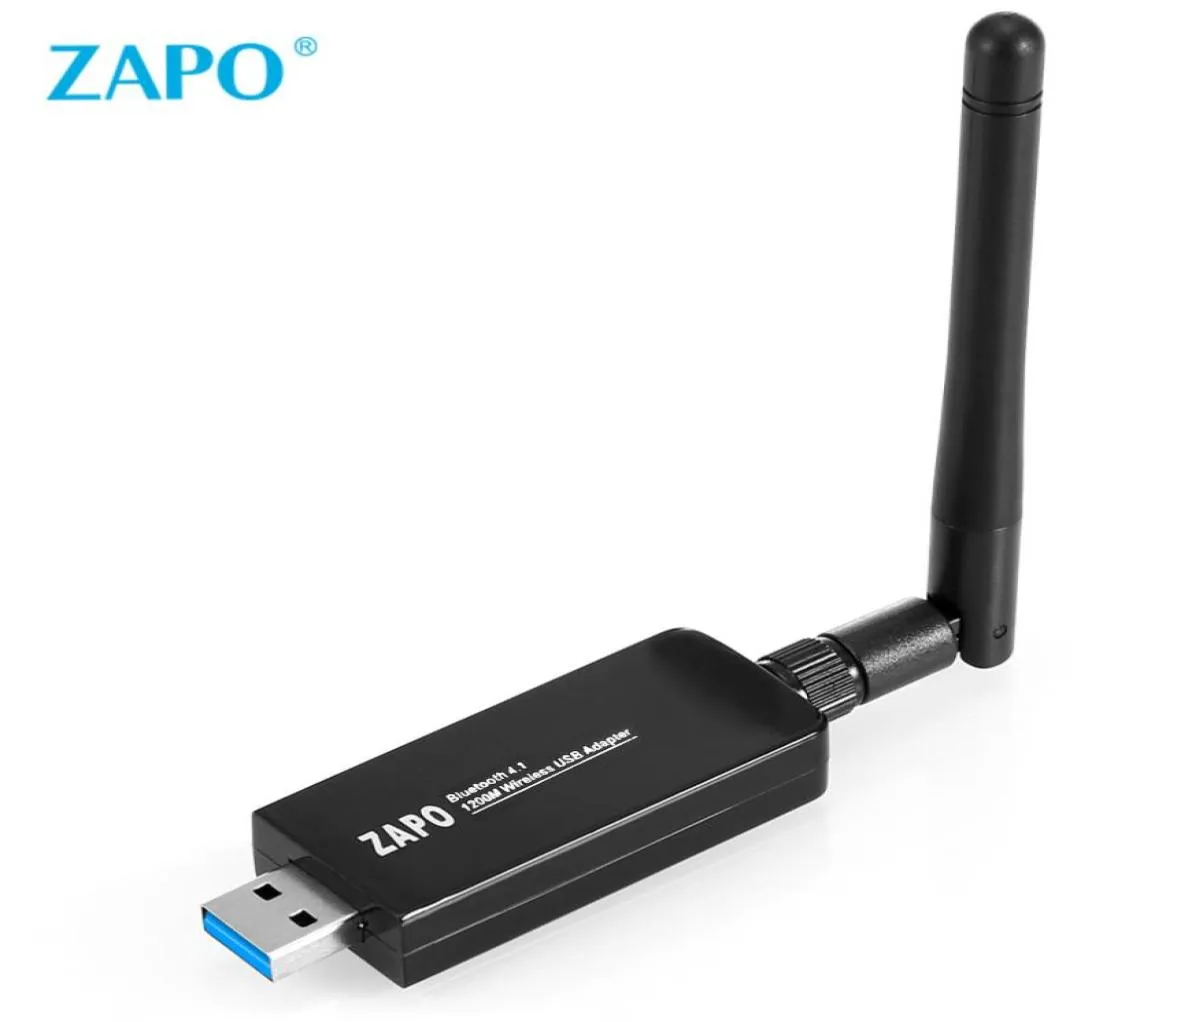 ZAPO W79L 2DB USB WIFI Adapter 1200m Portable Network Router 24 58GHz Bluetooth 41 WiFi Receiver Network Card5686146